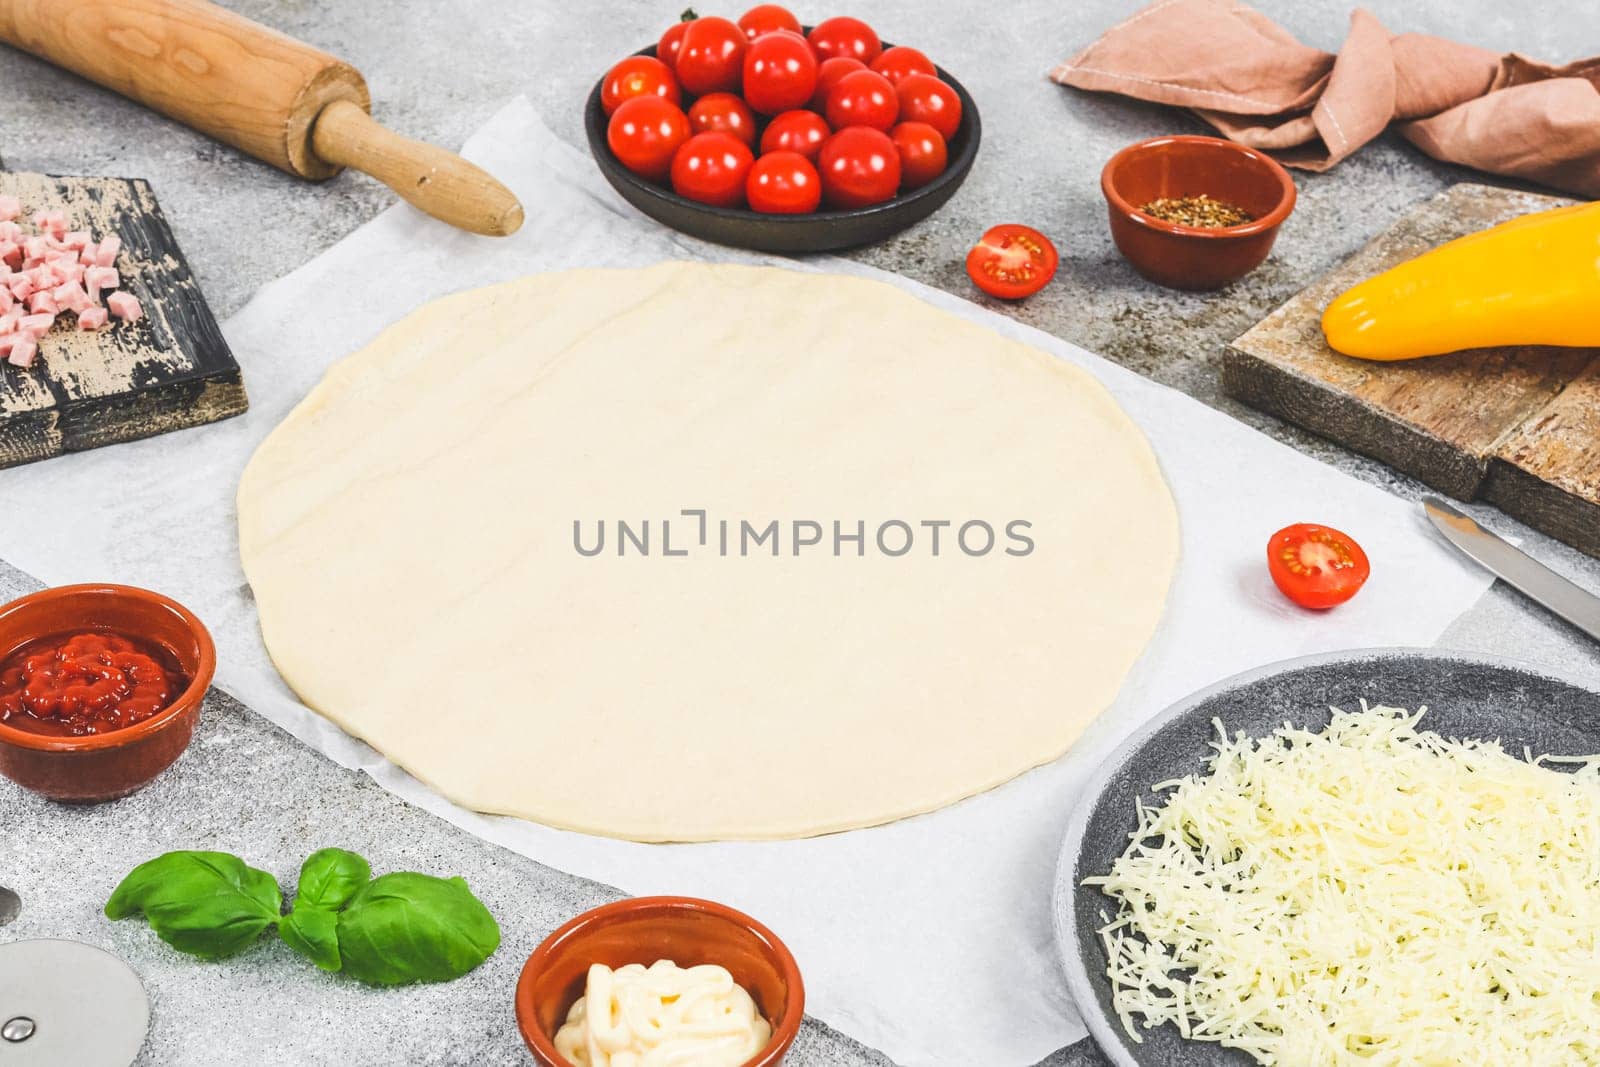 Pizza ingredients: cherry tomato, pepper, cheese, ham, basil with dough rolled out in a circle and a wooden chip lie on the table with copy space, side view close-up. Concept of cooking pizza.